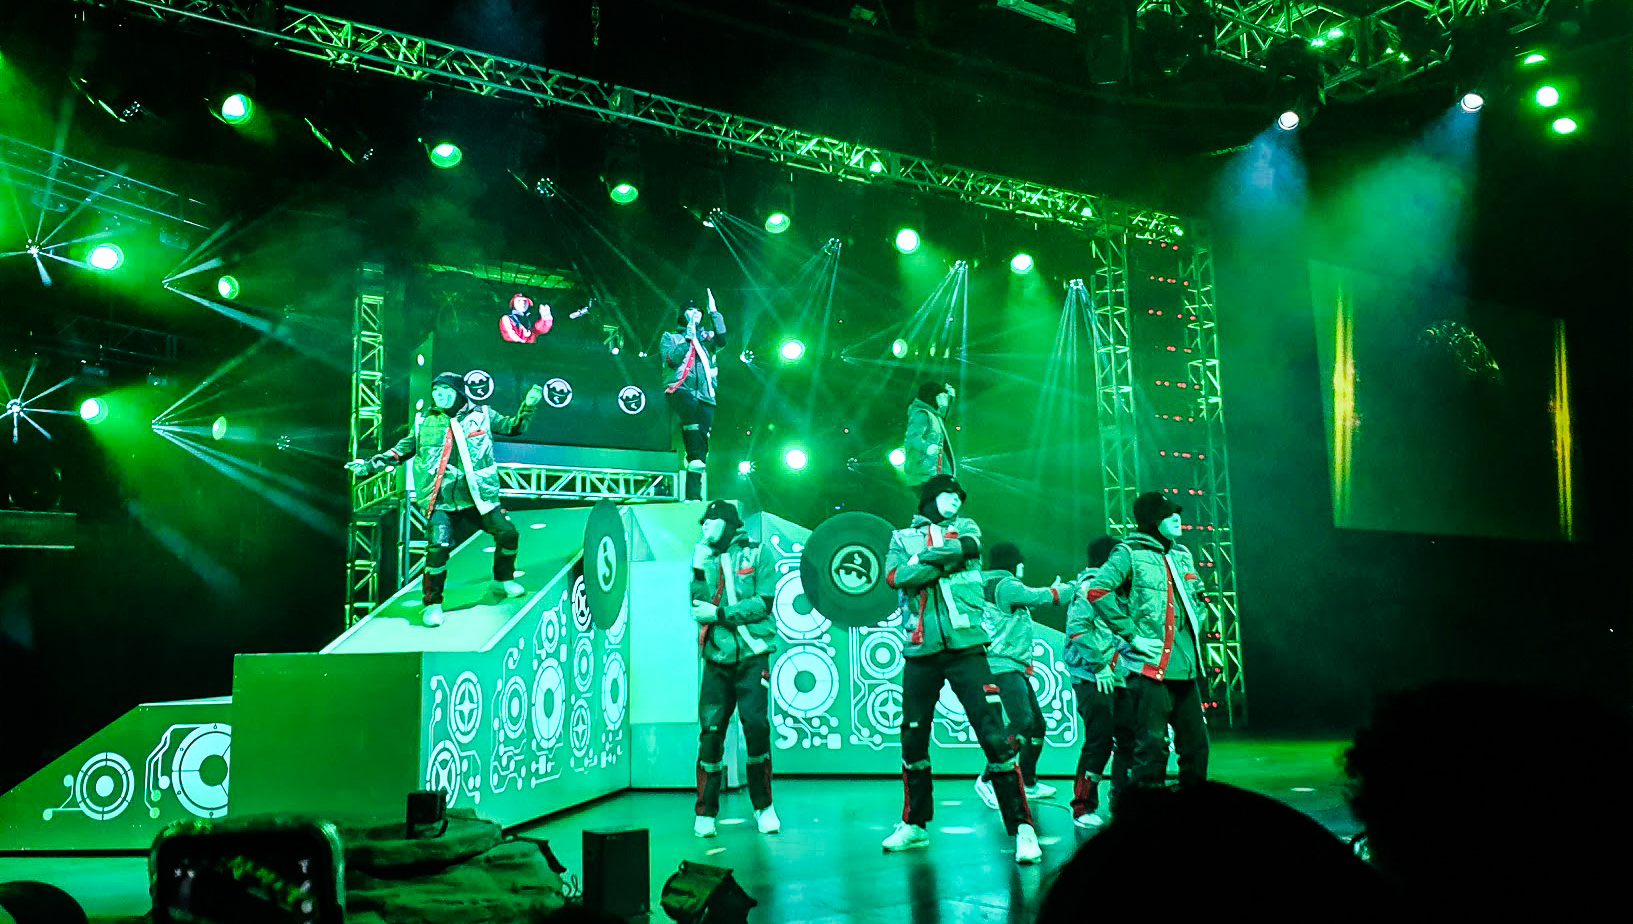 The whole crew is on stage, lit in bright green and the DJ rocks out